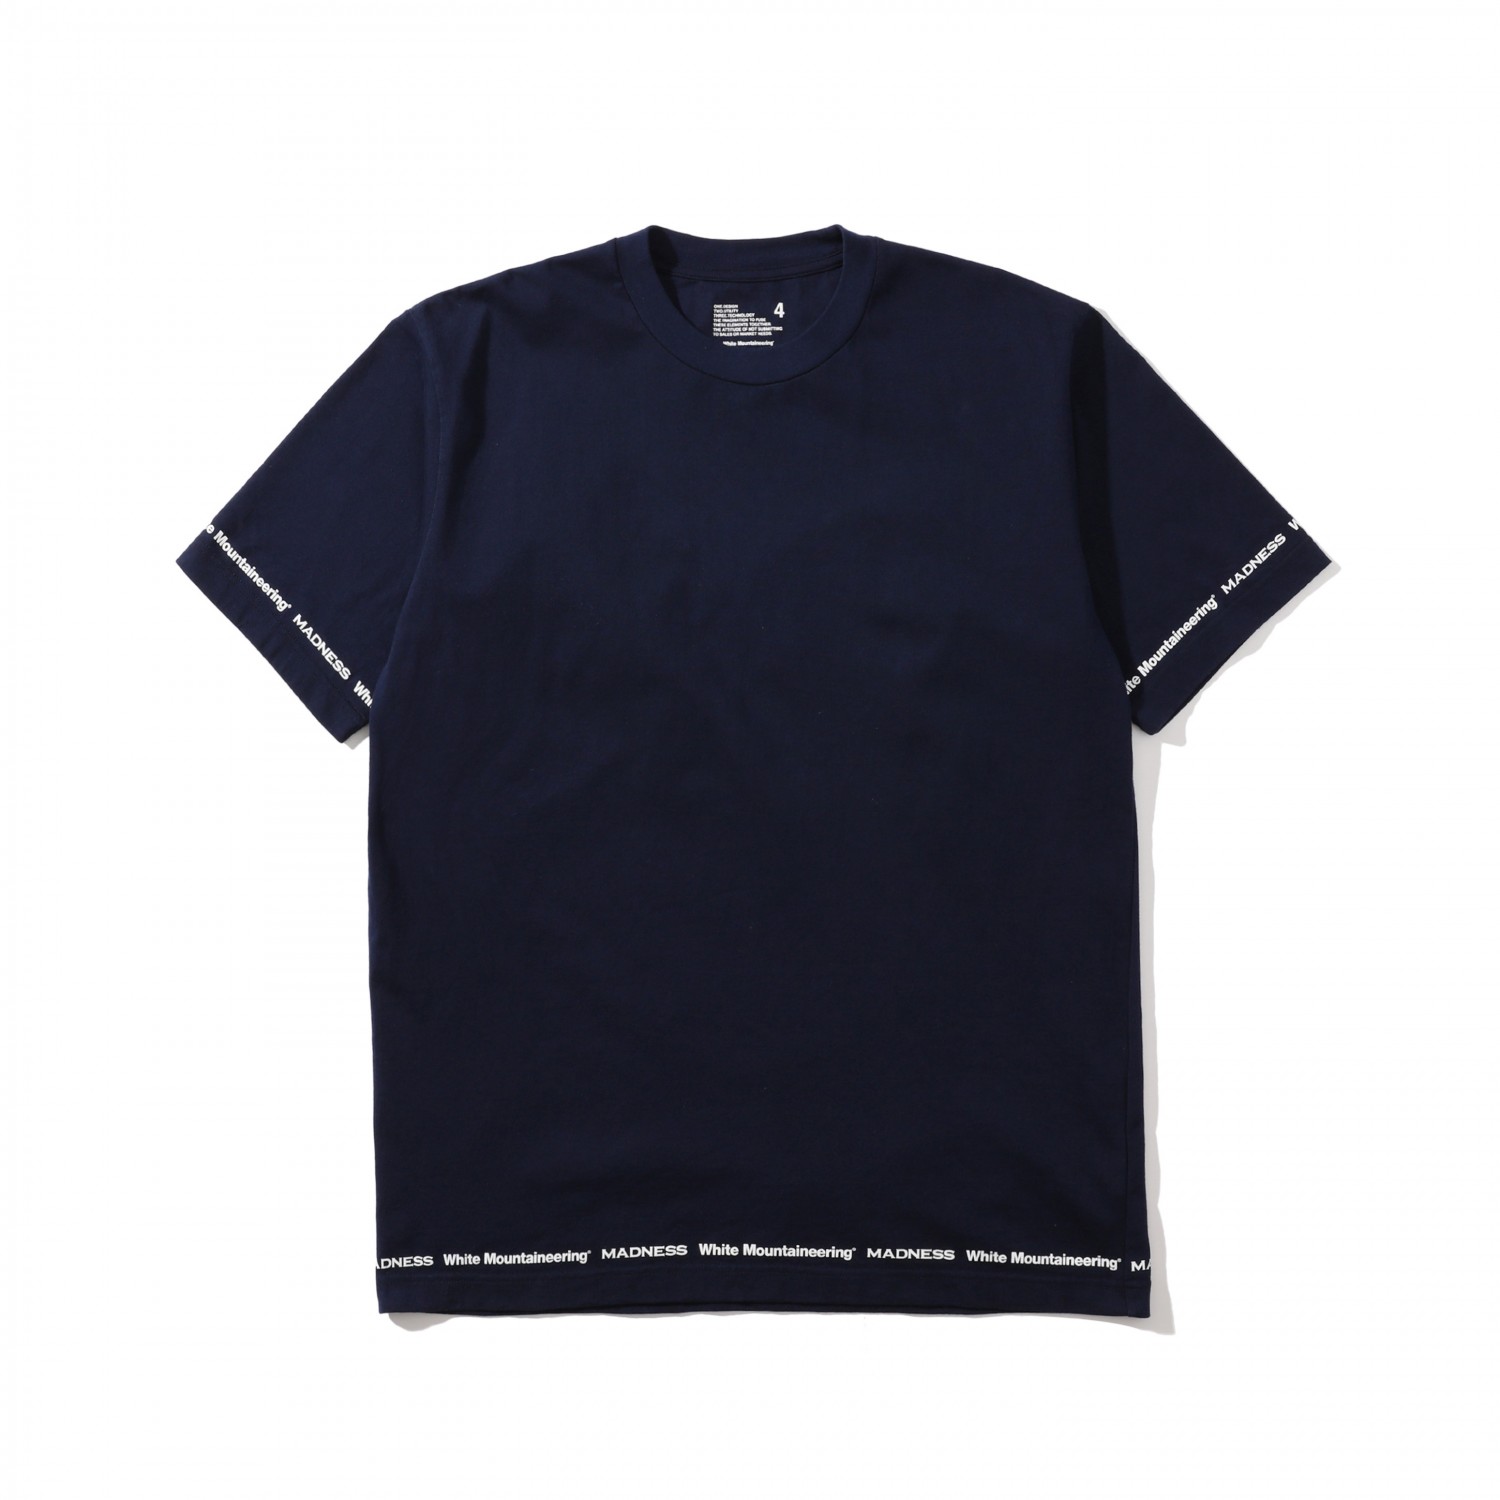 MDNS x WHITE MOUNTAINEERING PRINT TEE | MADNESS